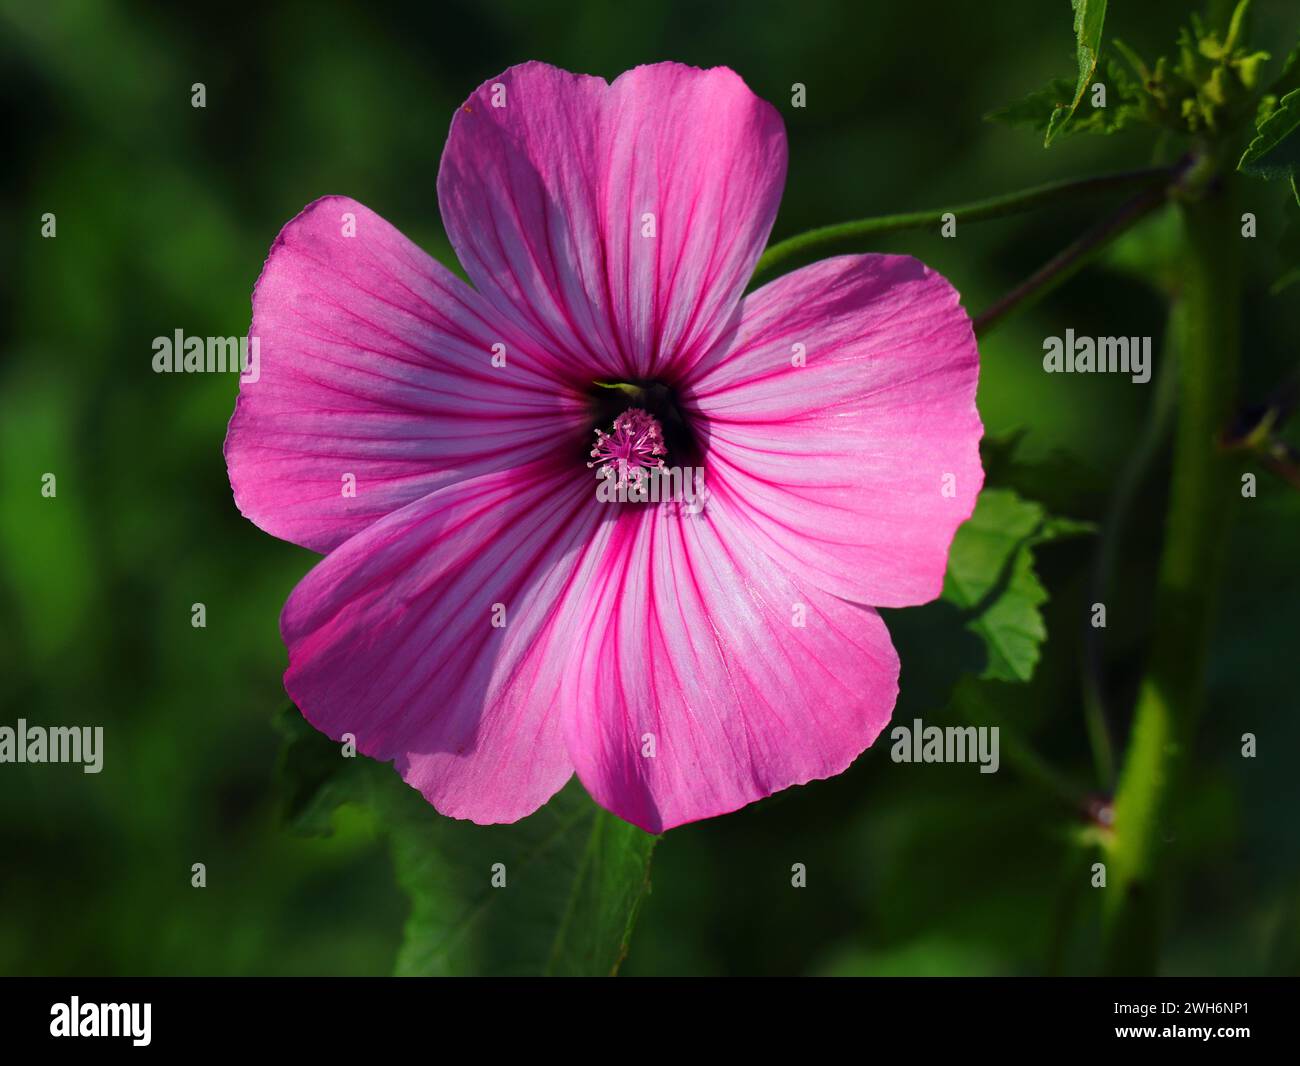 Spring, Portugal. Annual Mallow also known as Rose Mallow or Royal Mallow. Lavatera rosa in full bloom in natural surroundings. Malvaceae Family. Stock Photo